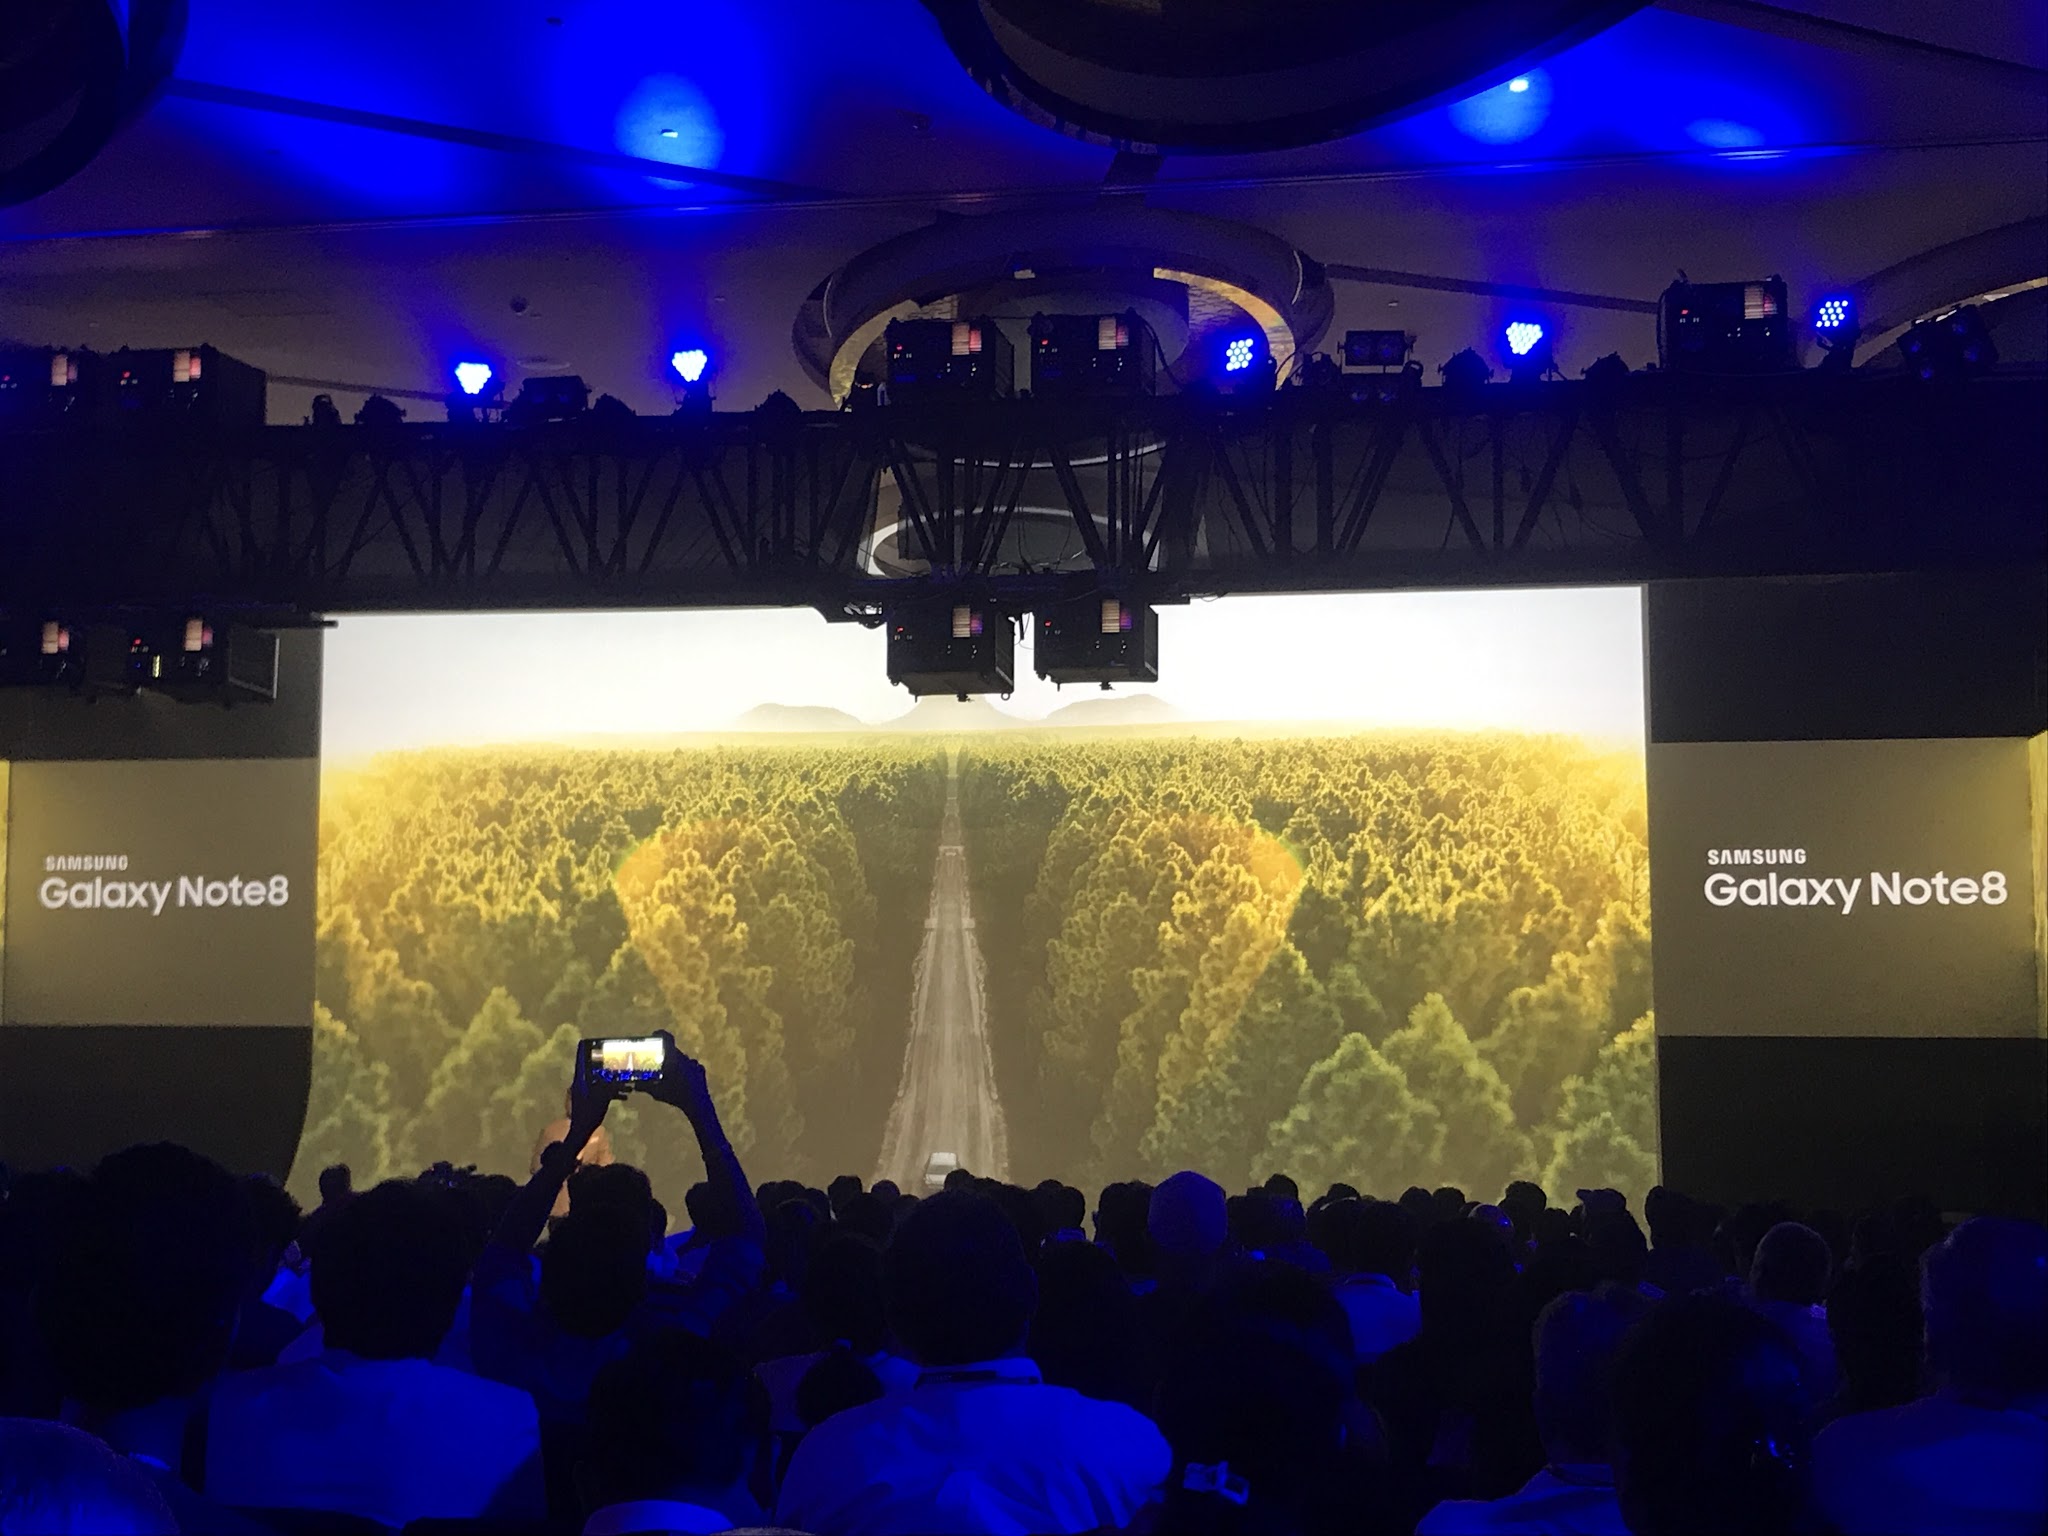 Samsung Galaxy Note 8 India launch image